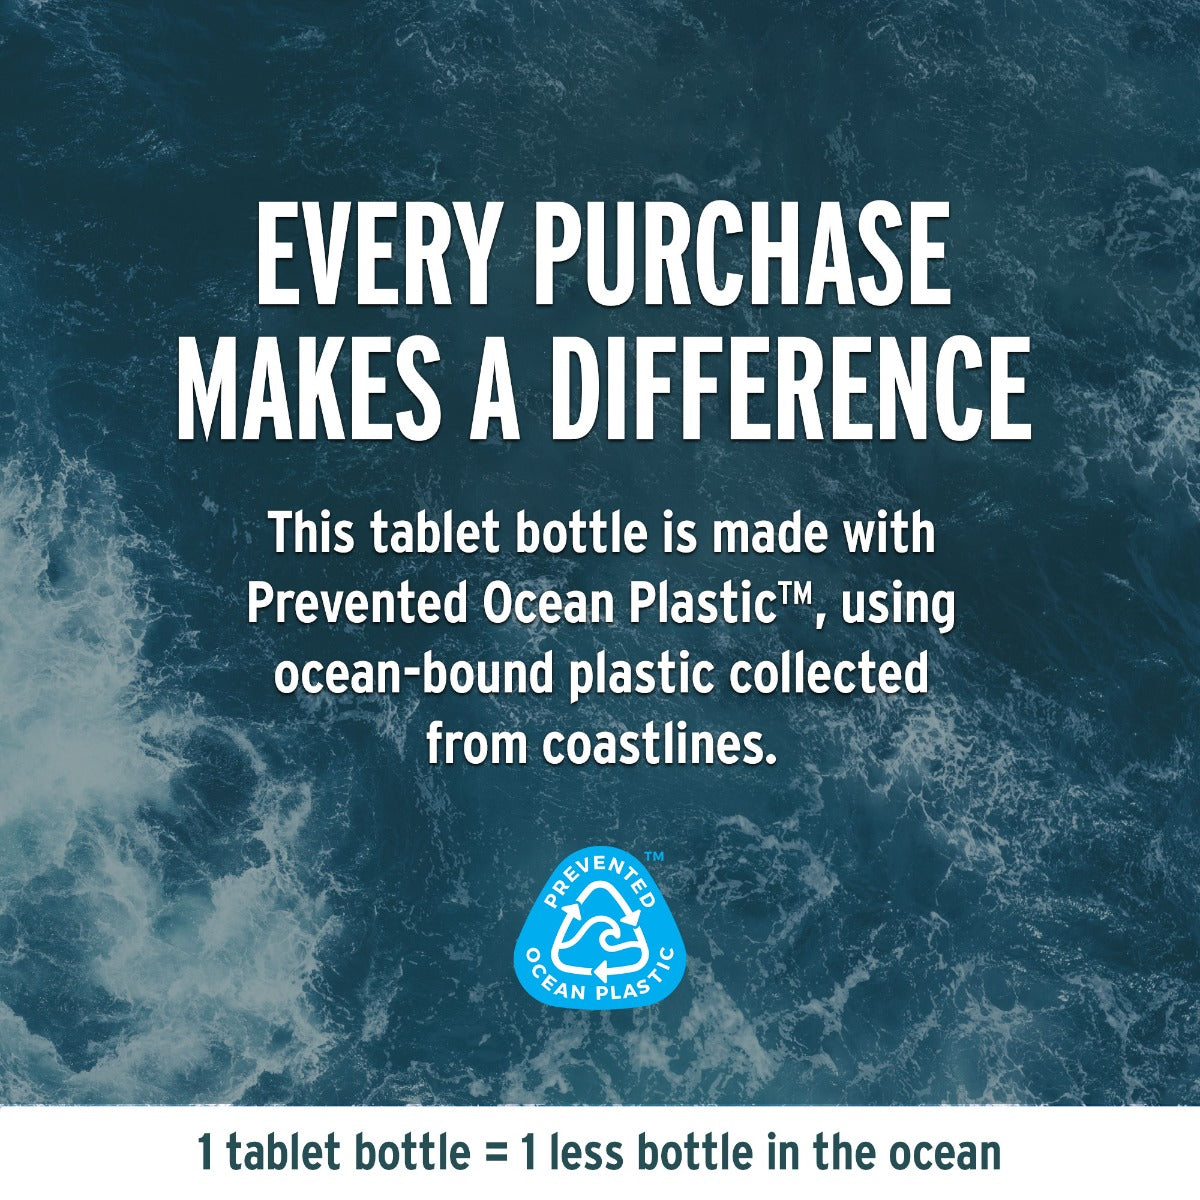 Women's Natural Transitions Prevented Ocean Plastic Packaging